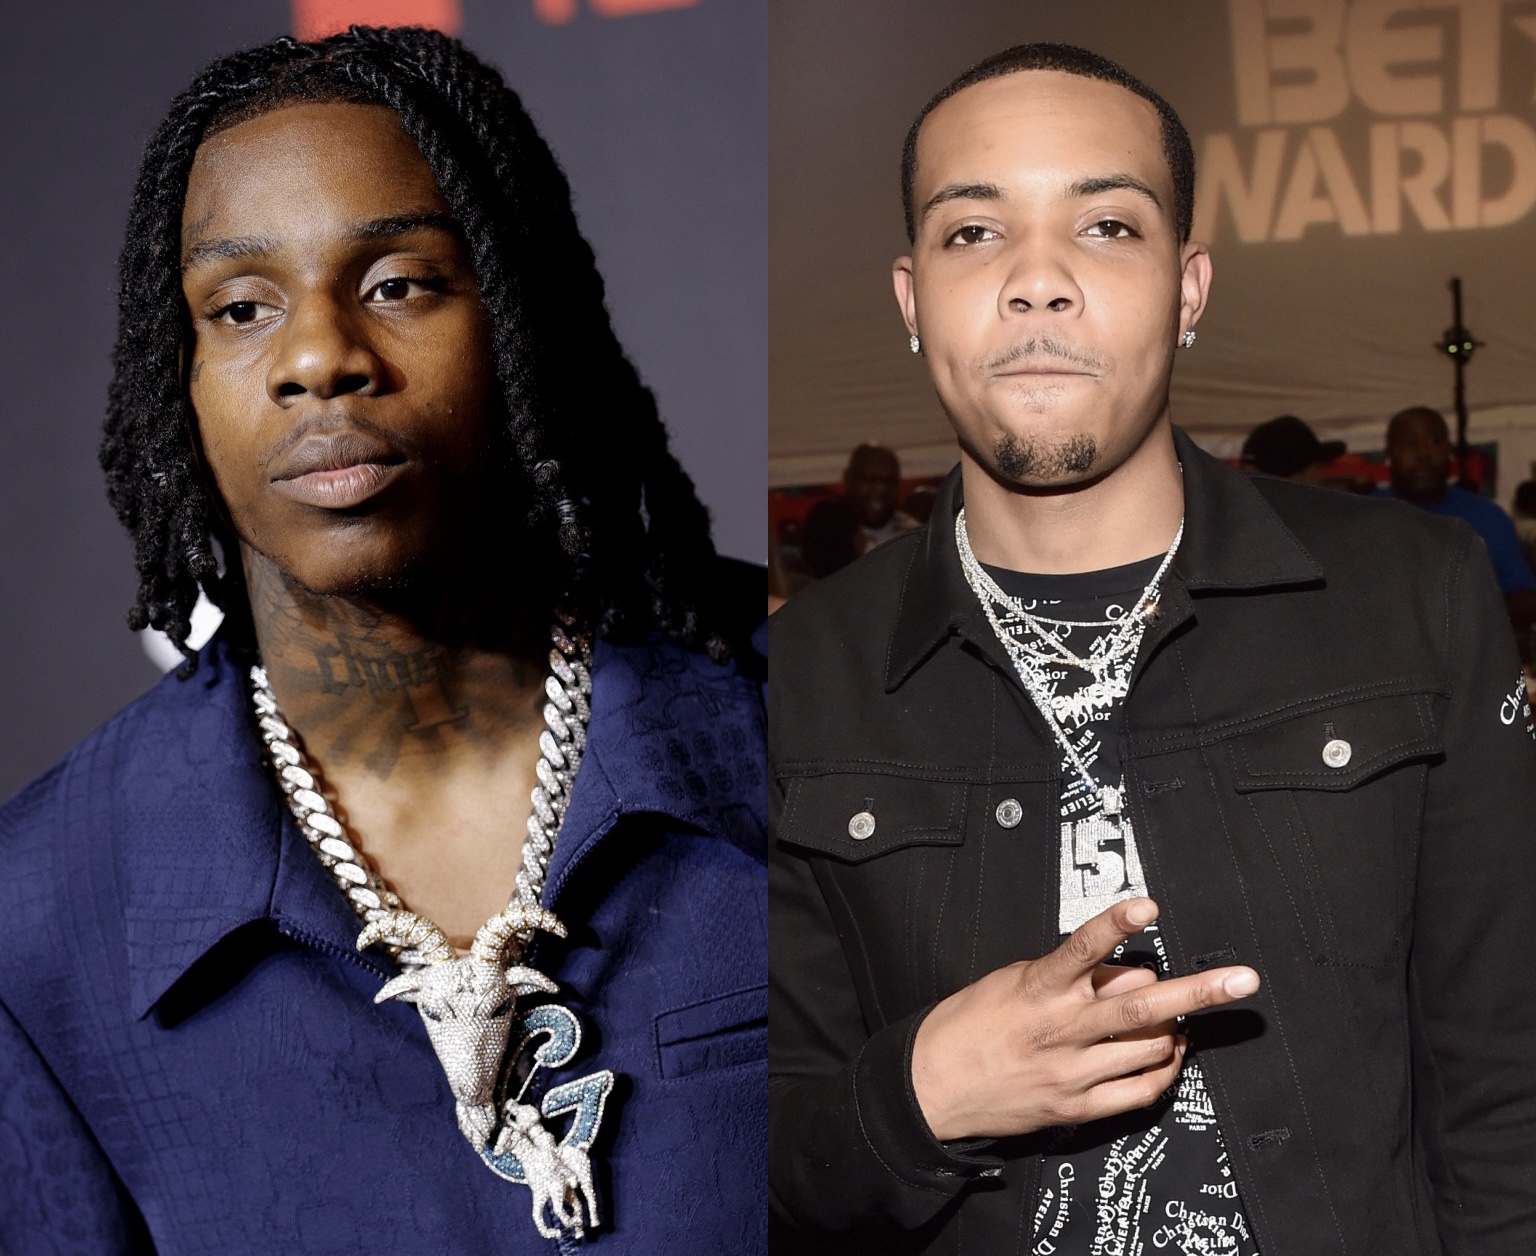 Polo G & G Herbo Named In $300K Lawsuit Over Cancelled Florida Concerts: Report